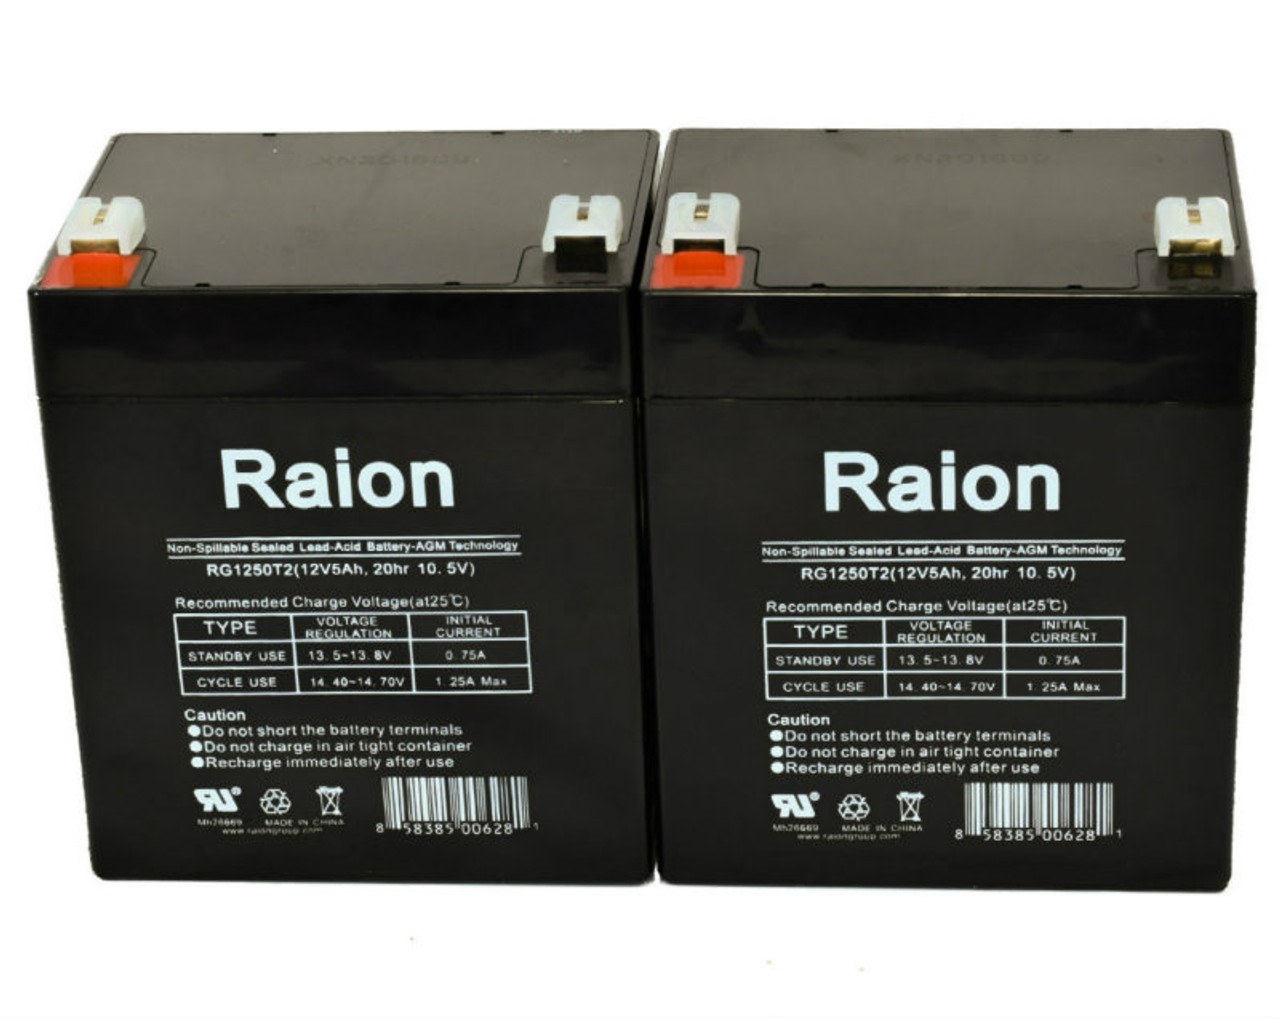 Raion Power 12V 5Ah RG1250T2 Replacement Lead Acid Battery for Duramp NP4-12 - 2 Pack